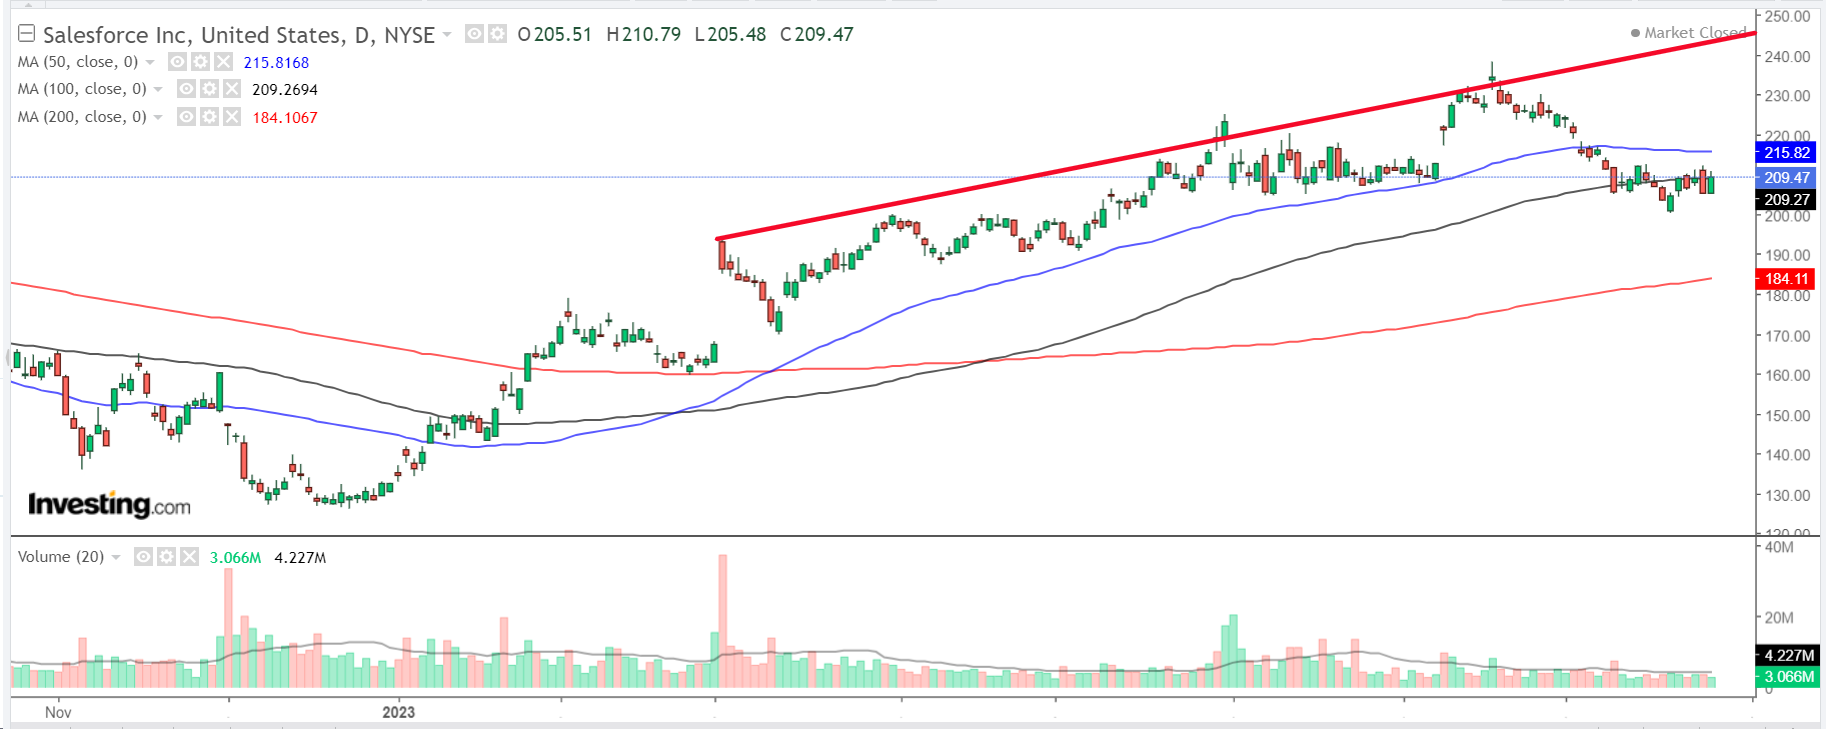 CRM daily chart